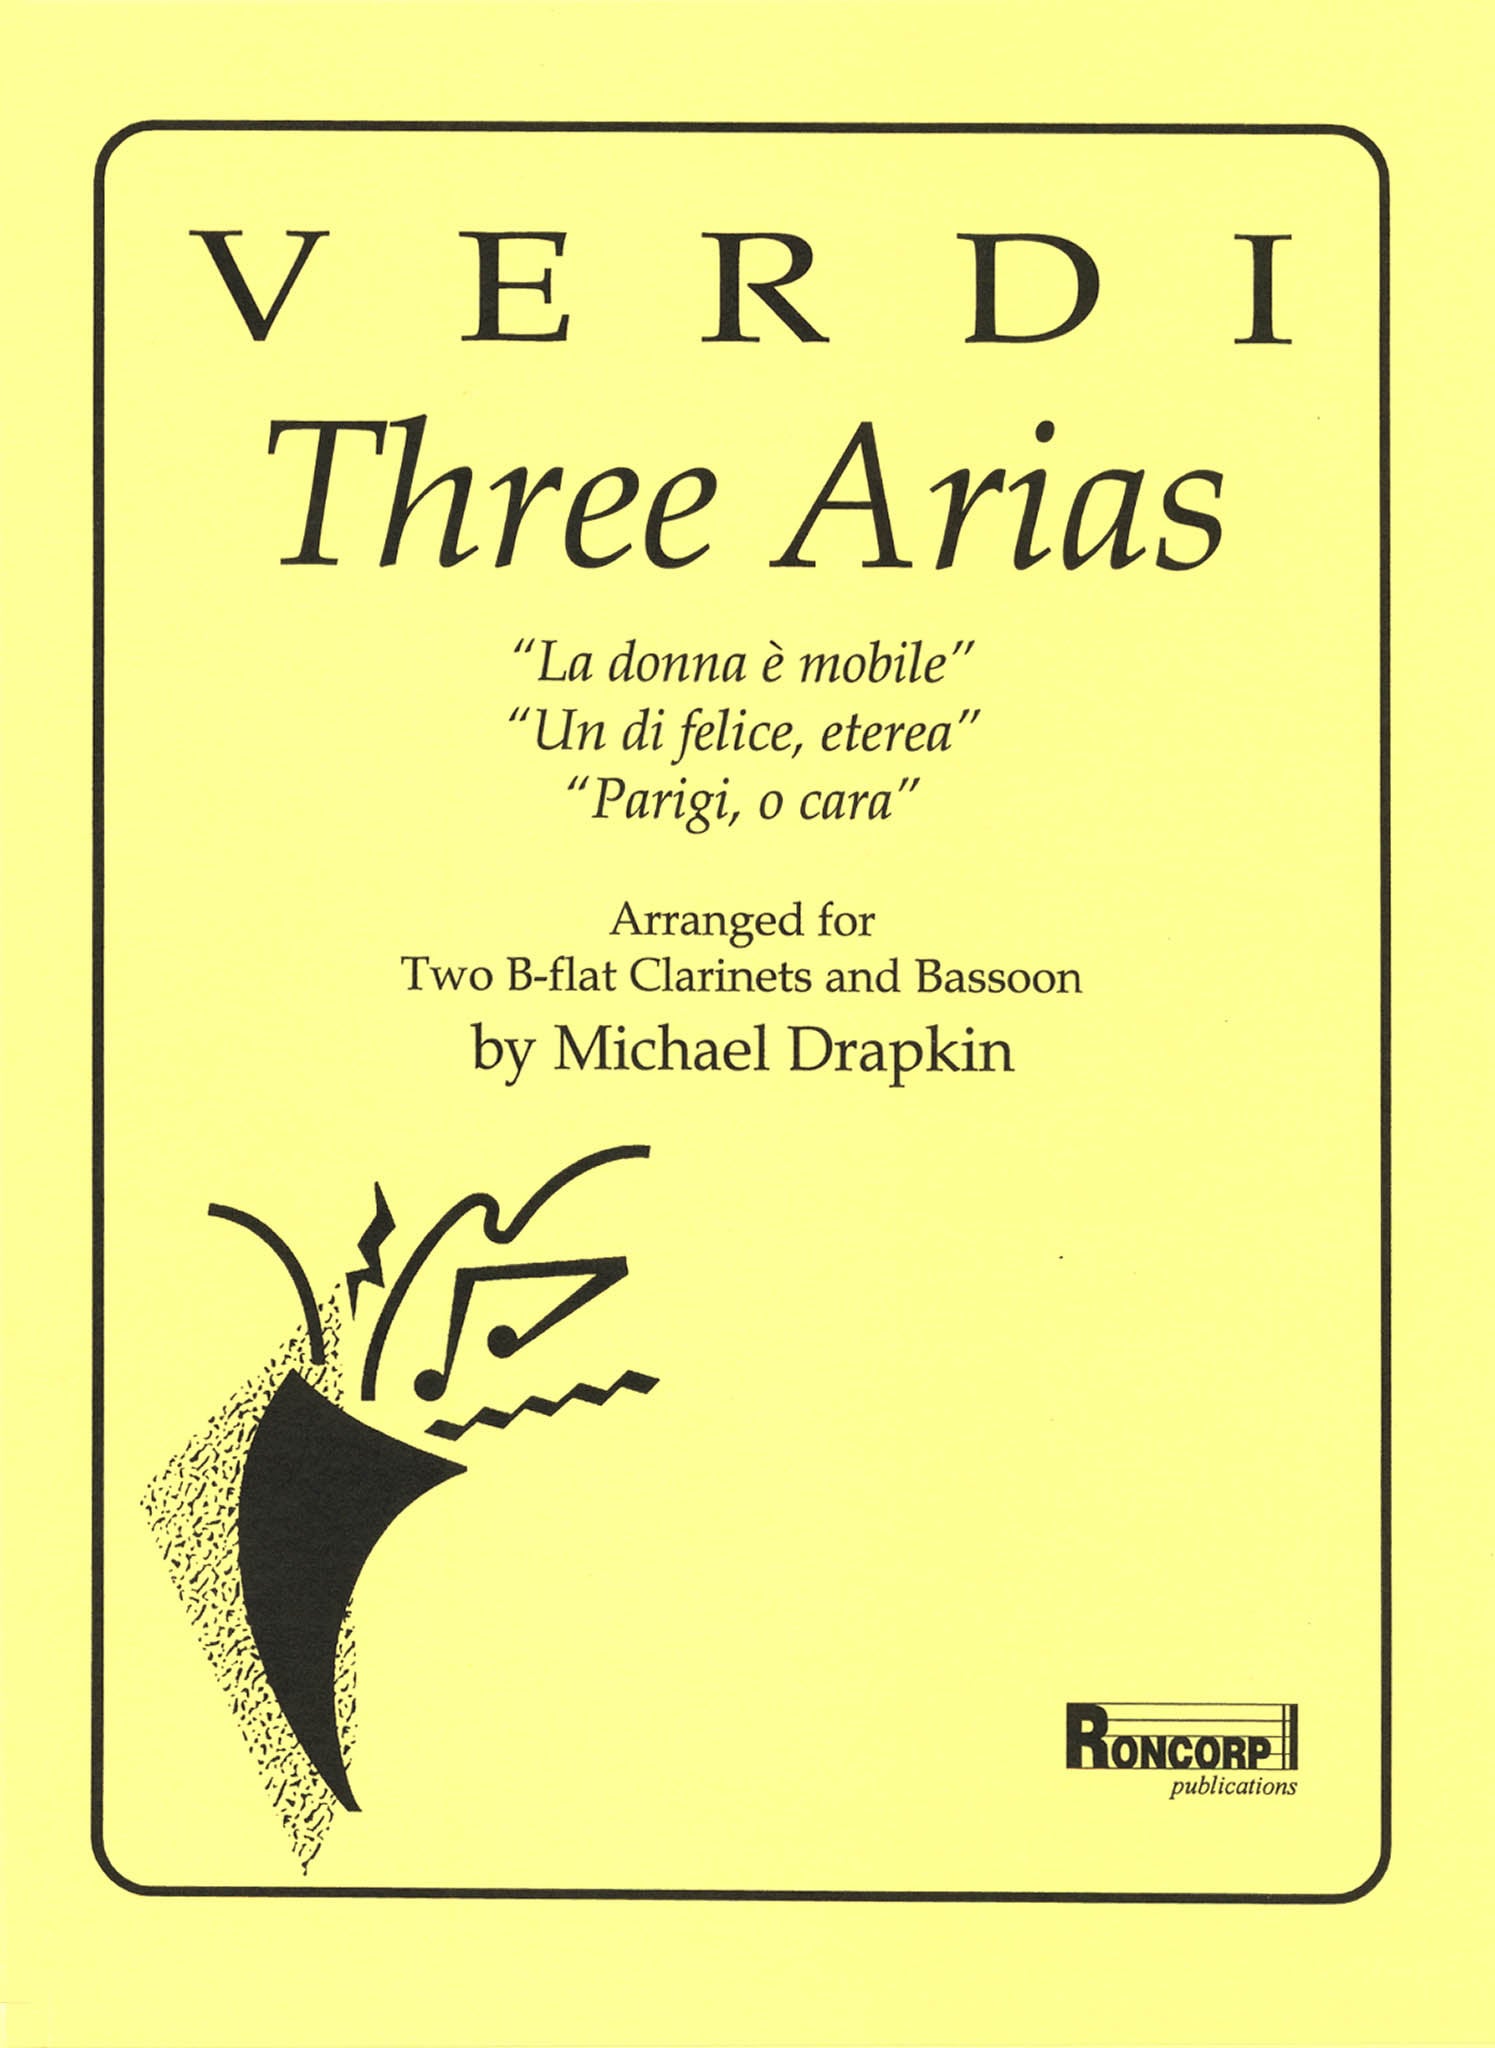 Verdi Three Opera Arias arranged for 2 clarinets and bassoon cover